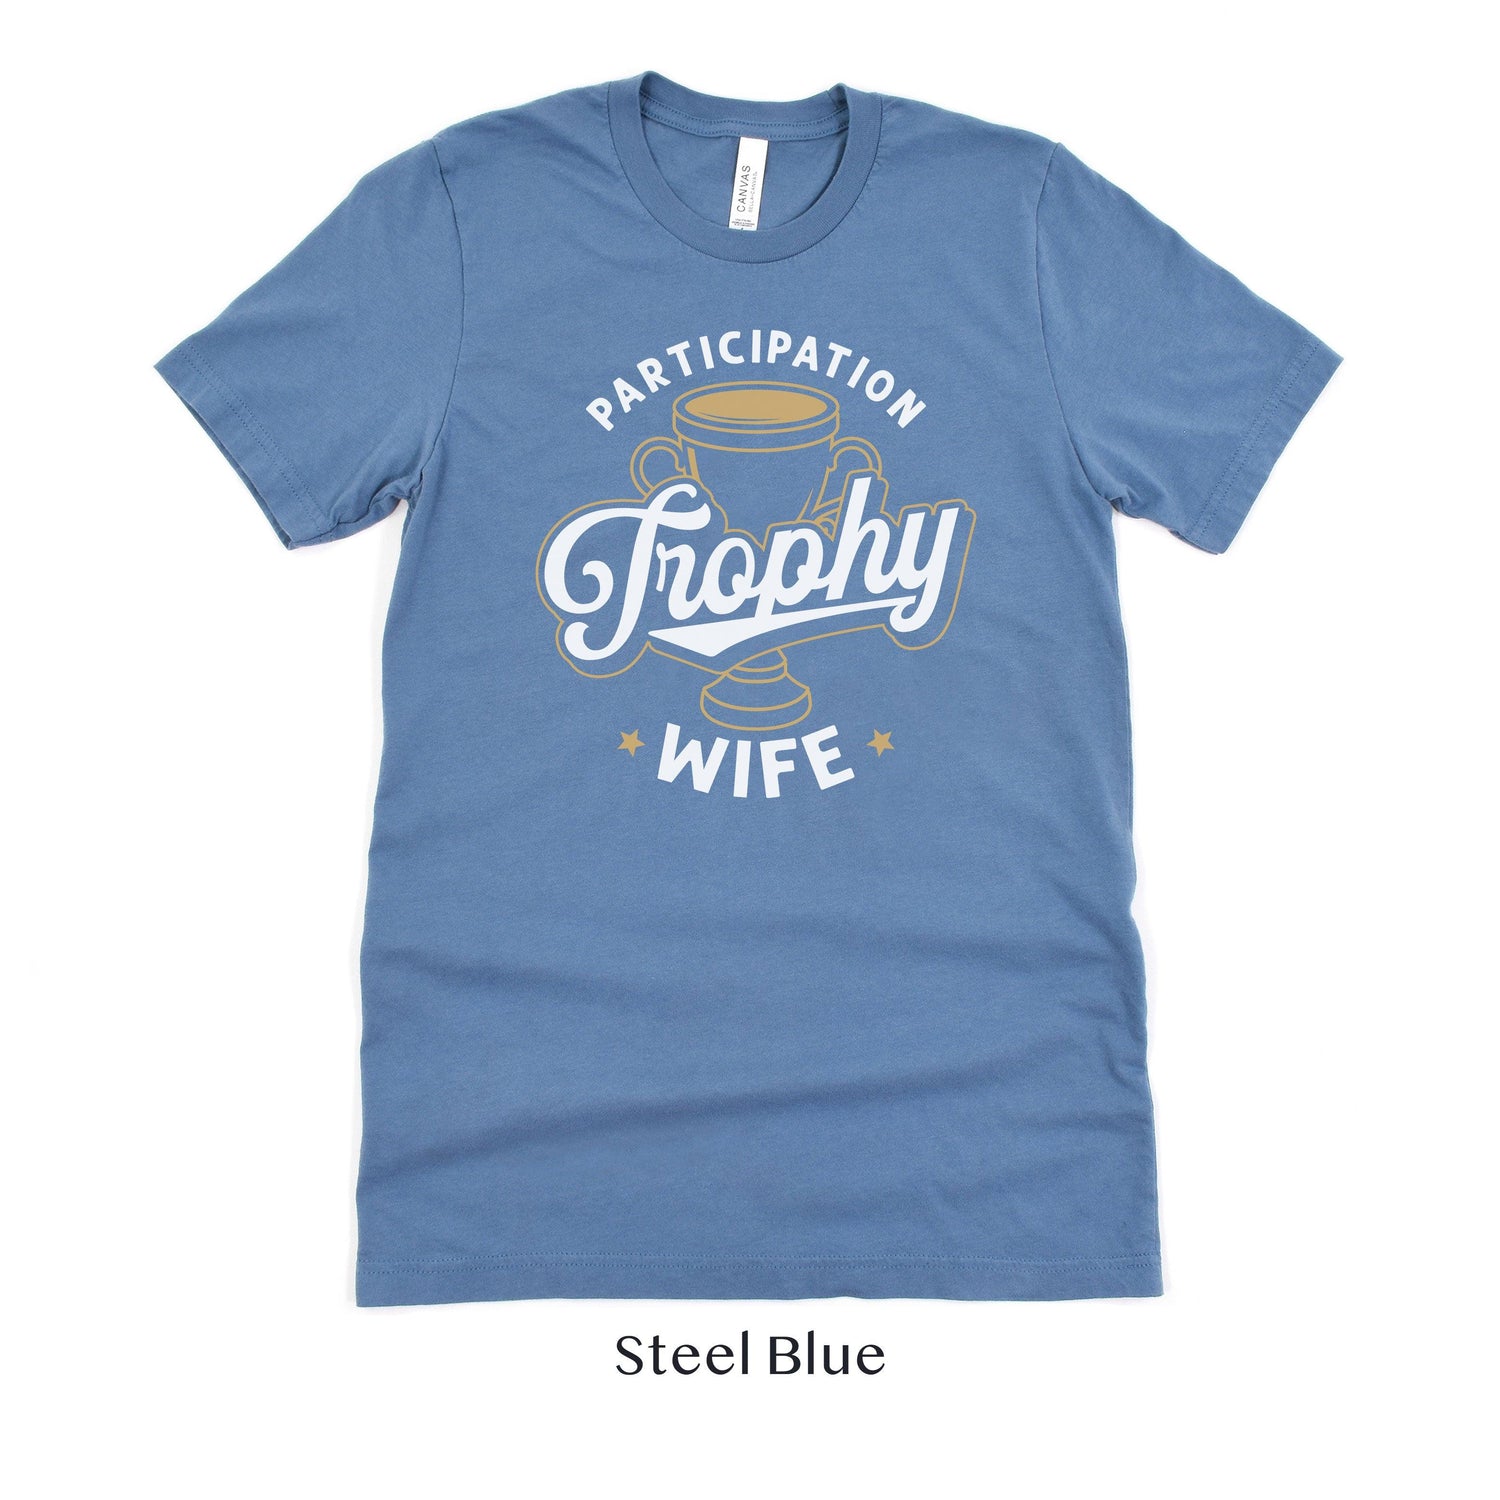 Participation Trophy Wife - Funny Wifey Shirt - Gift for Her - Unisex t-shirt by Oaklynn Lane